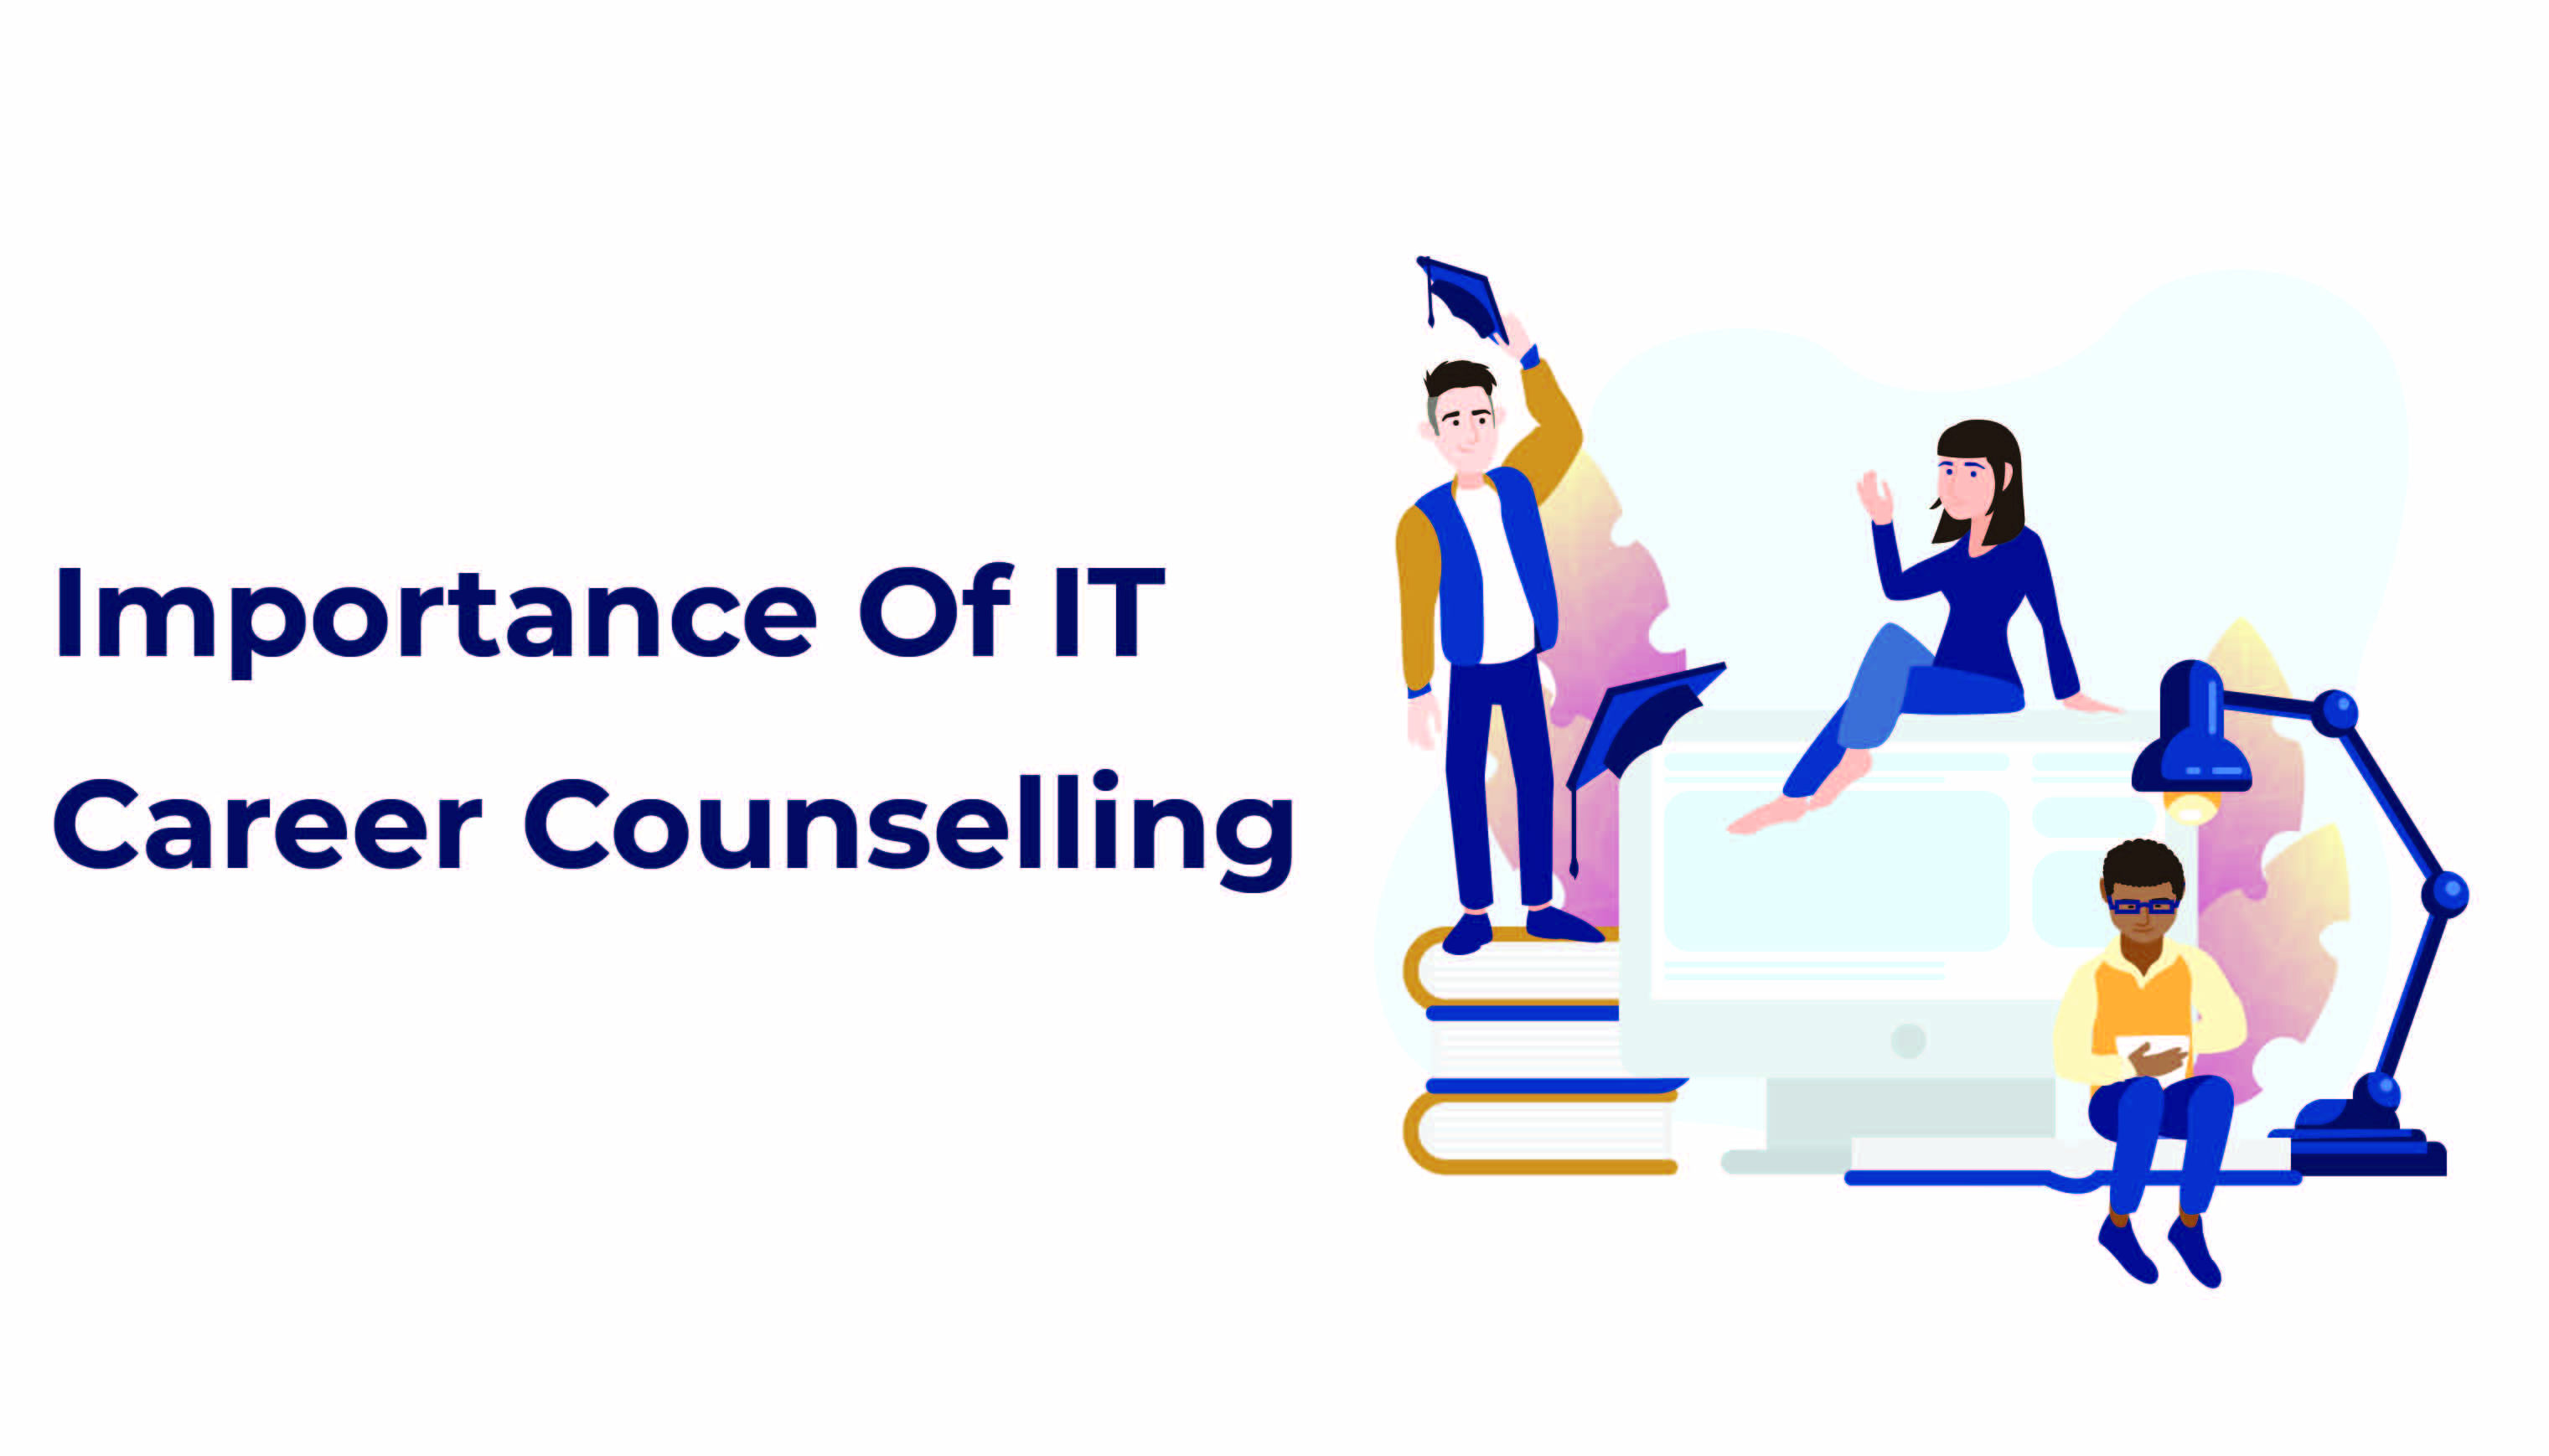 The Importance Of IT Career Counselling